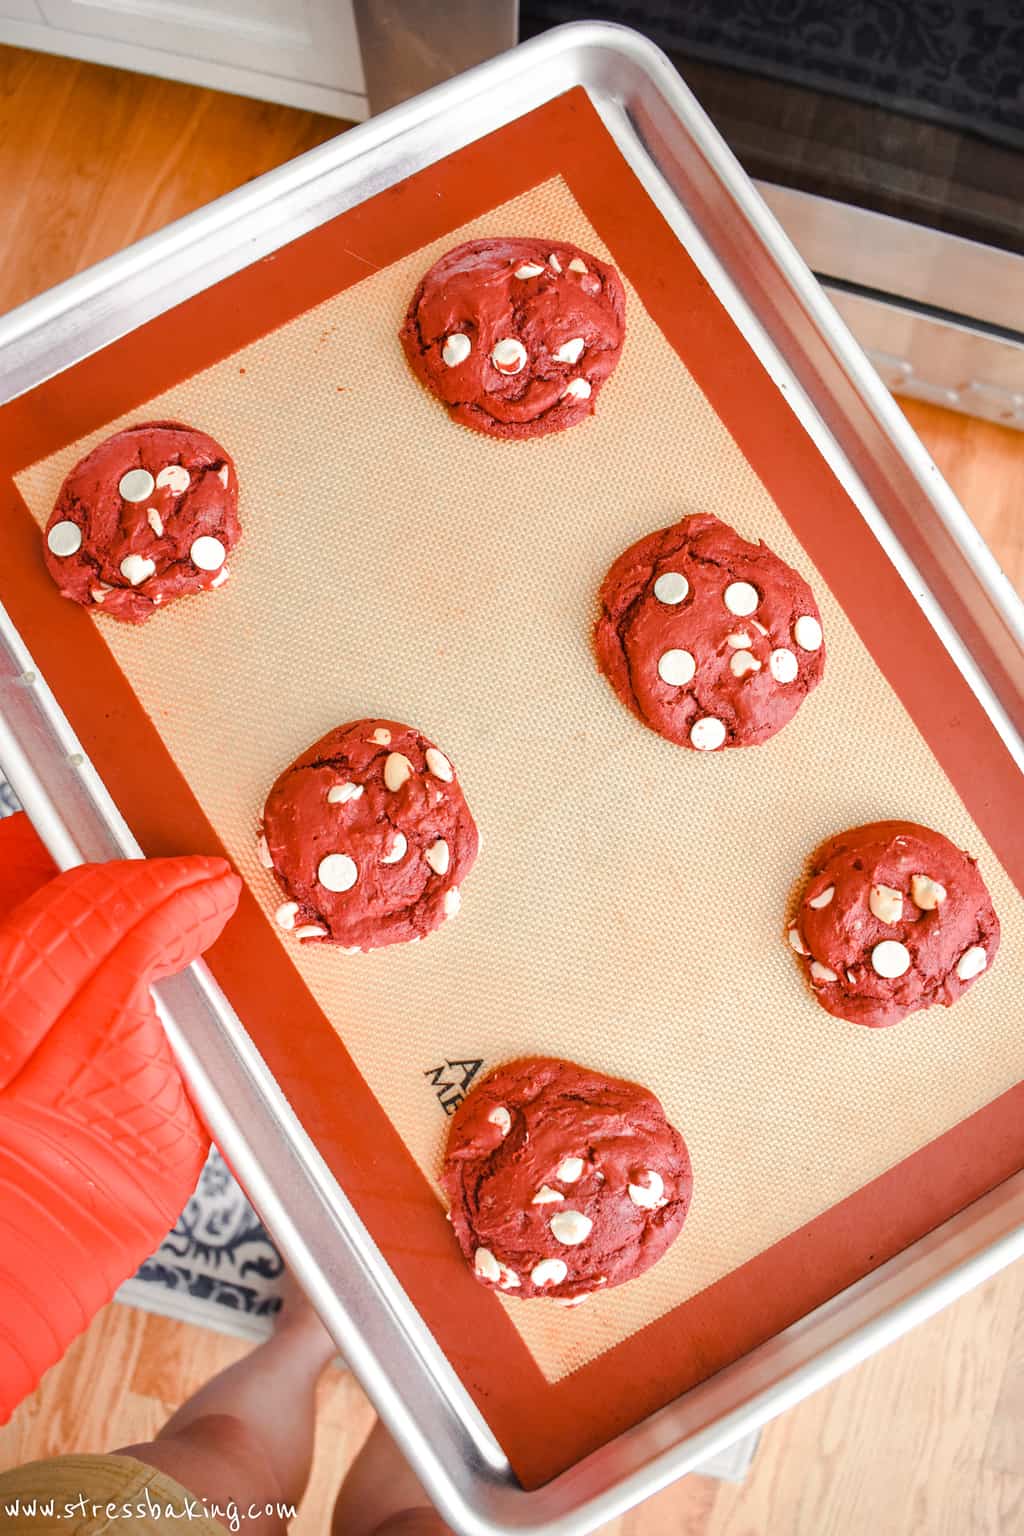 Freshly baked red velvet cookies with white chocolate chips on a baking sheet